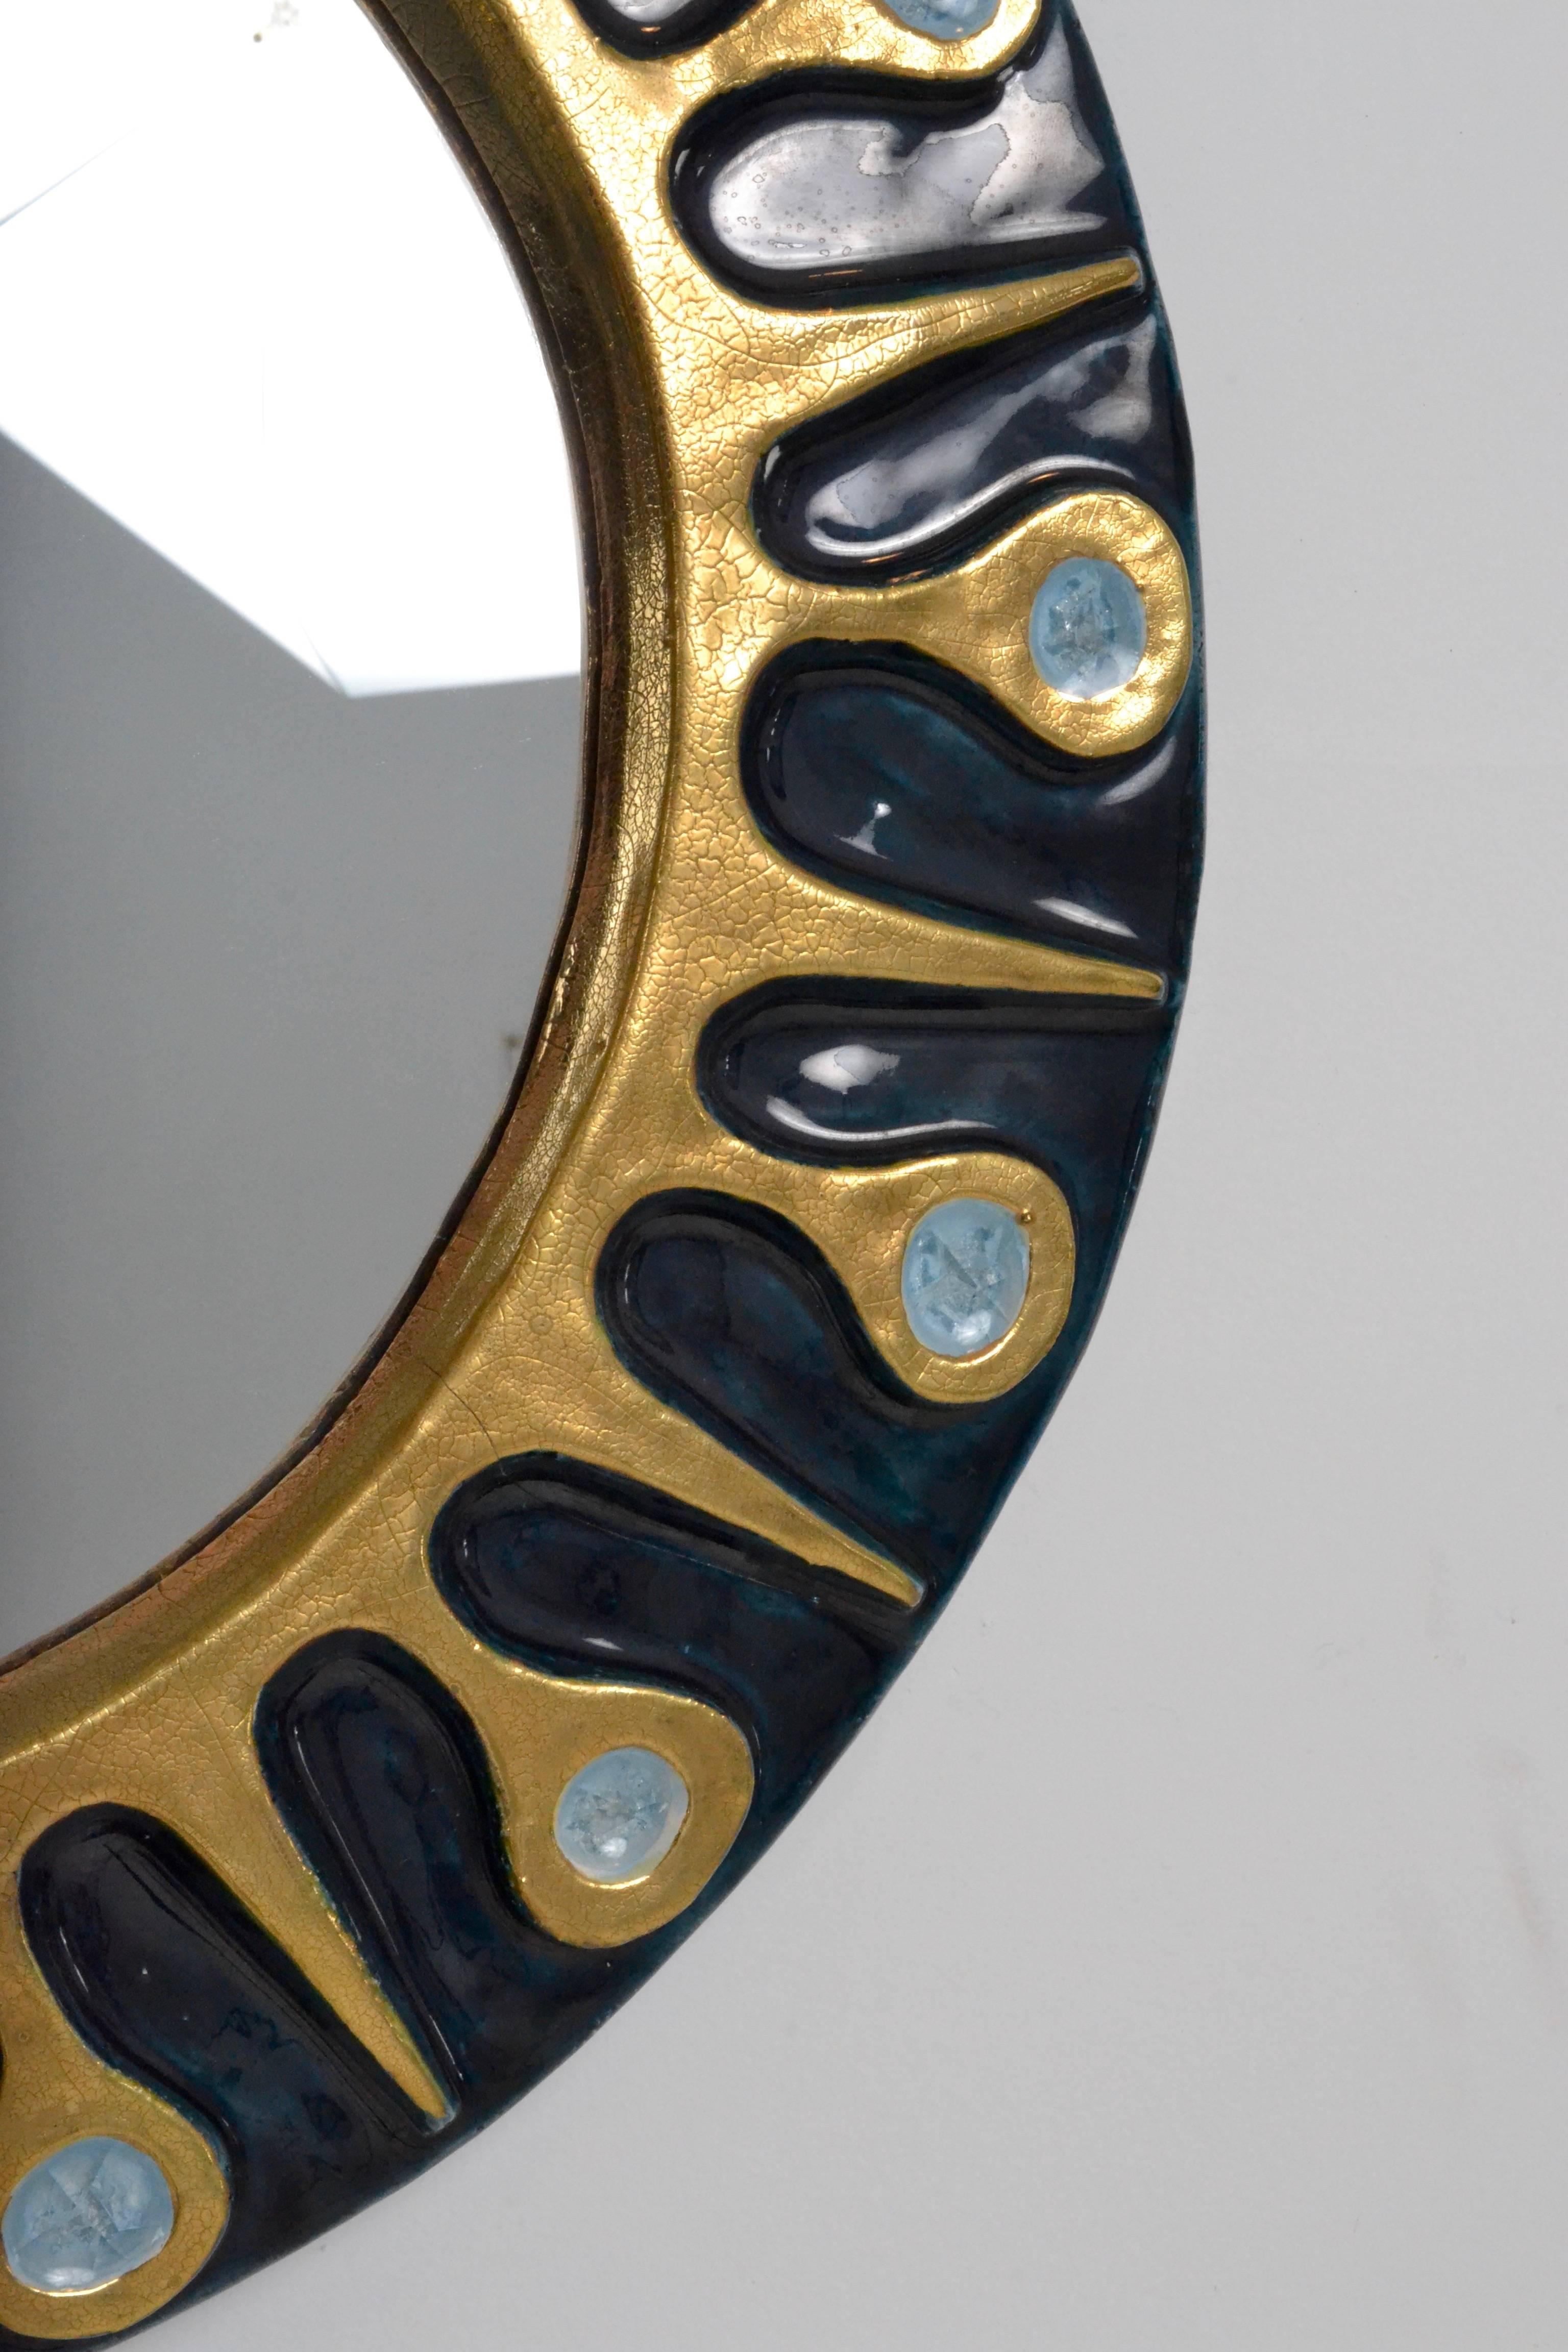 Decorative mirror with distinctive design featuring a dark teal glaze combined with metallic gold and crackled glass inserts.